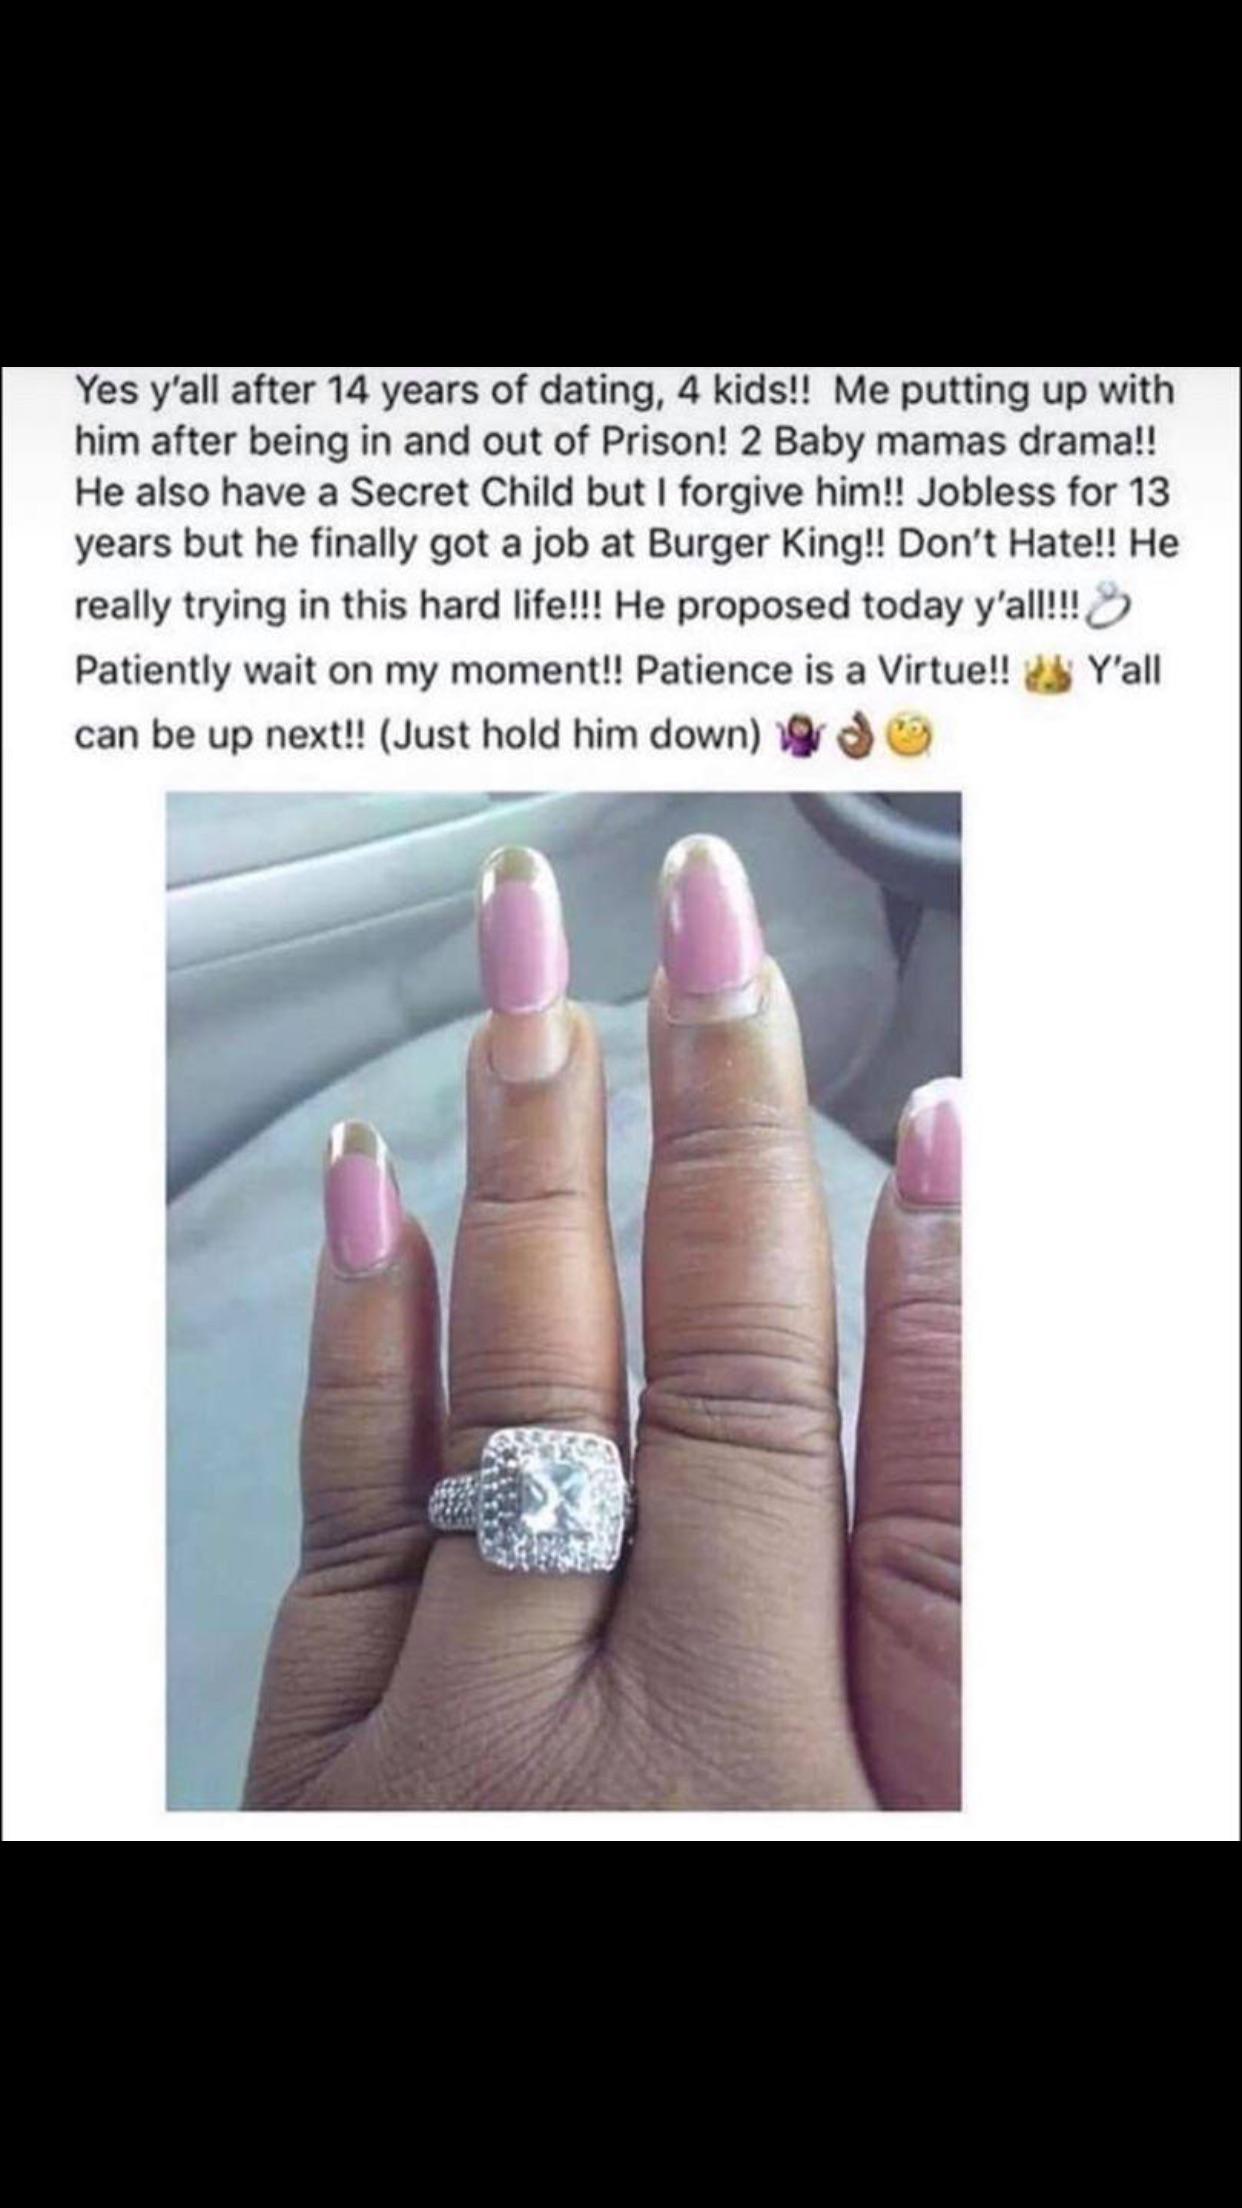 Ring - Yes y'all after 14 years of dating, 4 kids!! Me putting up with him after being in and out of Prison! 2 Baby mamas drama!! He also have a Secret Child but I forgive him!! Jobless for 13 years but he finally got a job at Burger King!! Don't Hate!! H